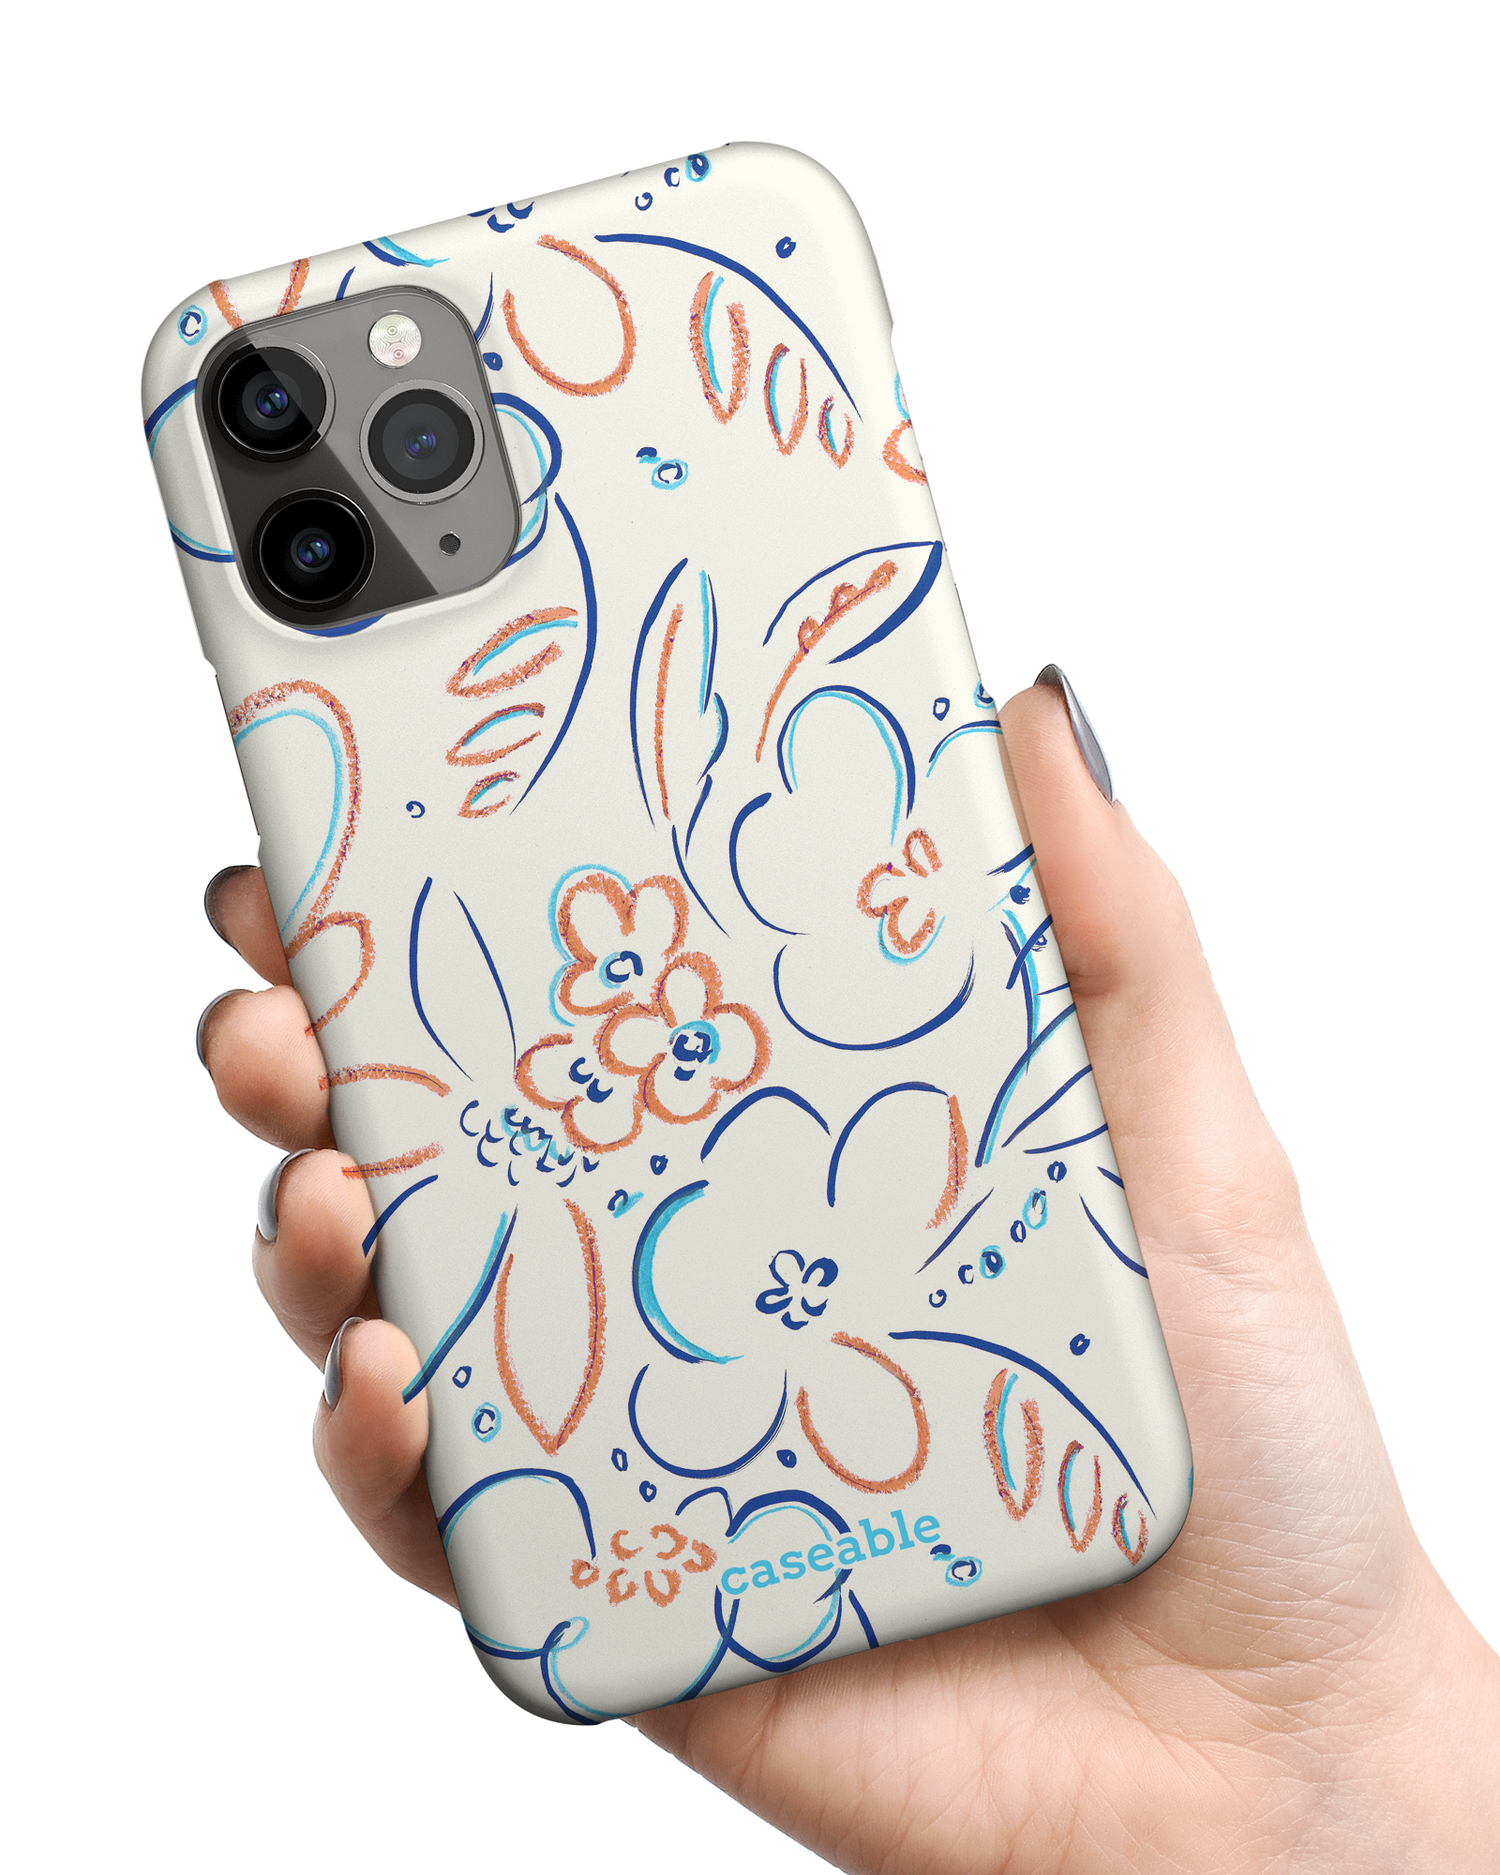 Bloom Doodles Hard Shell Phone Case Apple iPhone 11 Pro Max held in hand